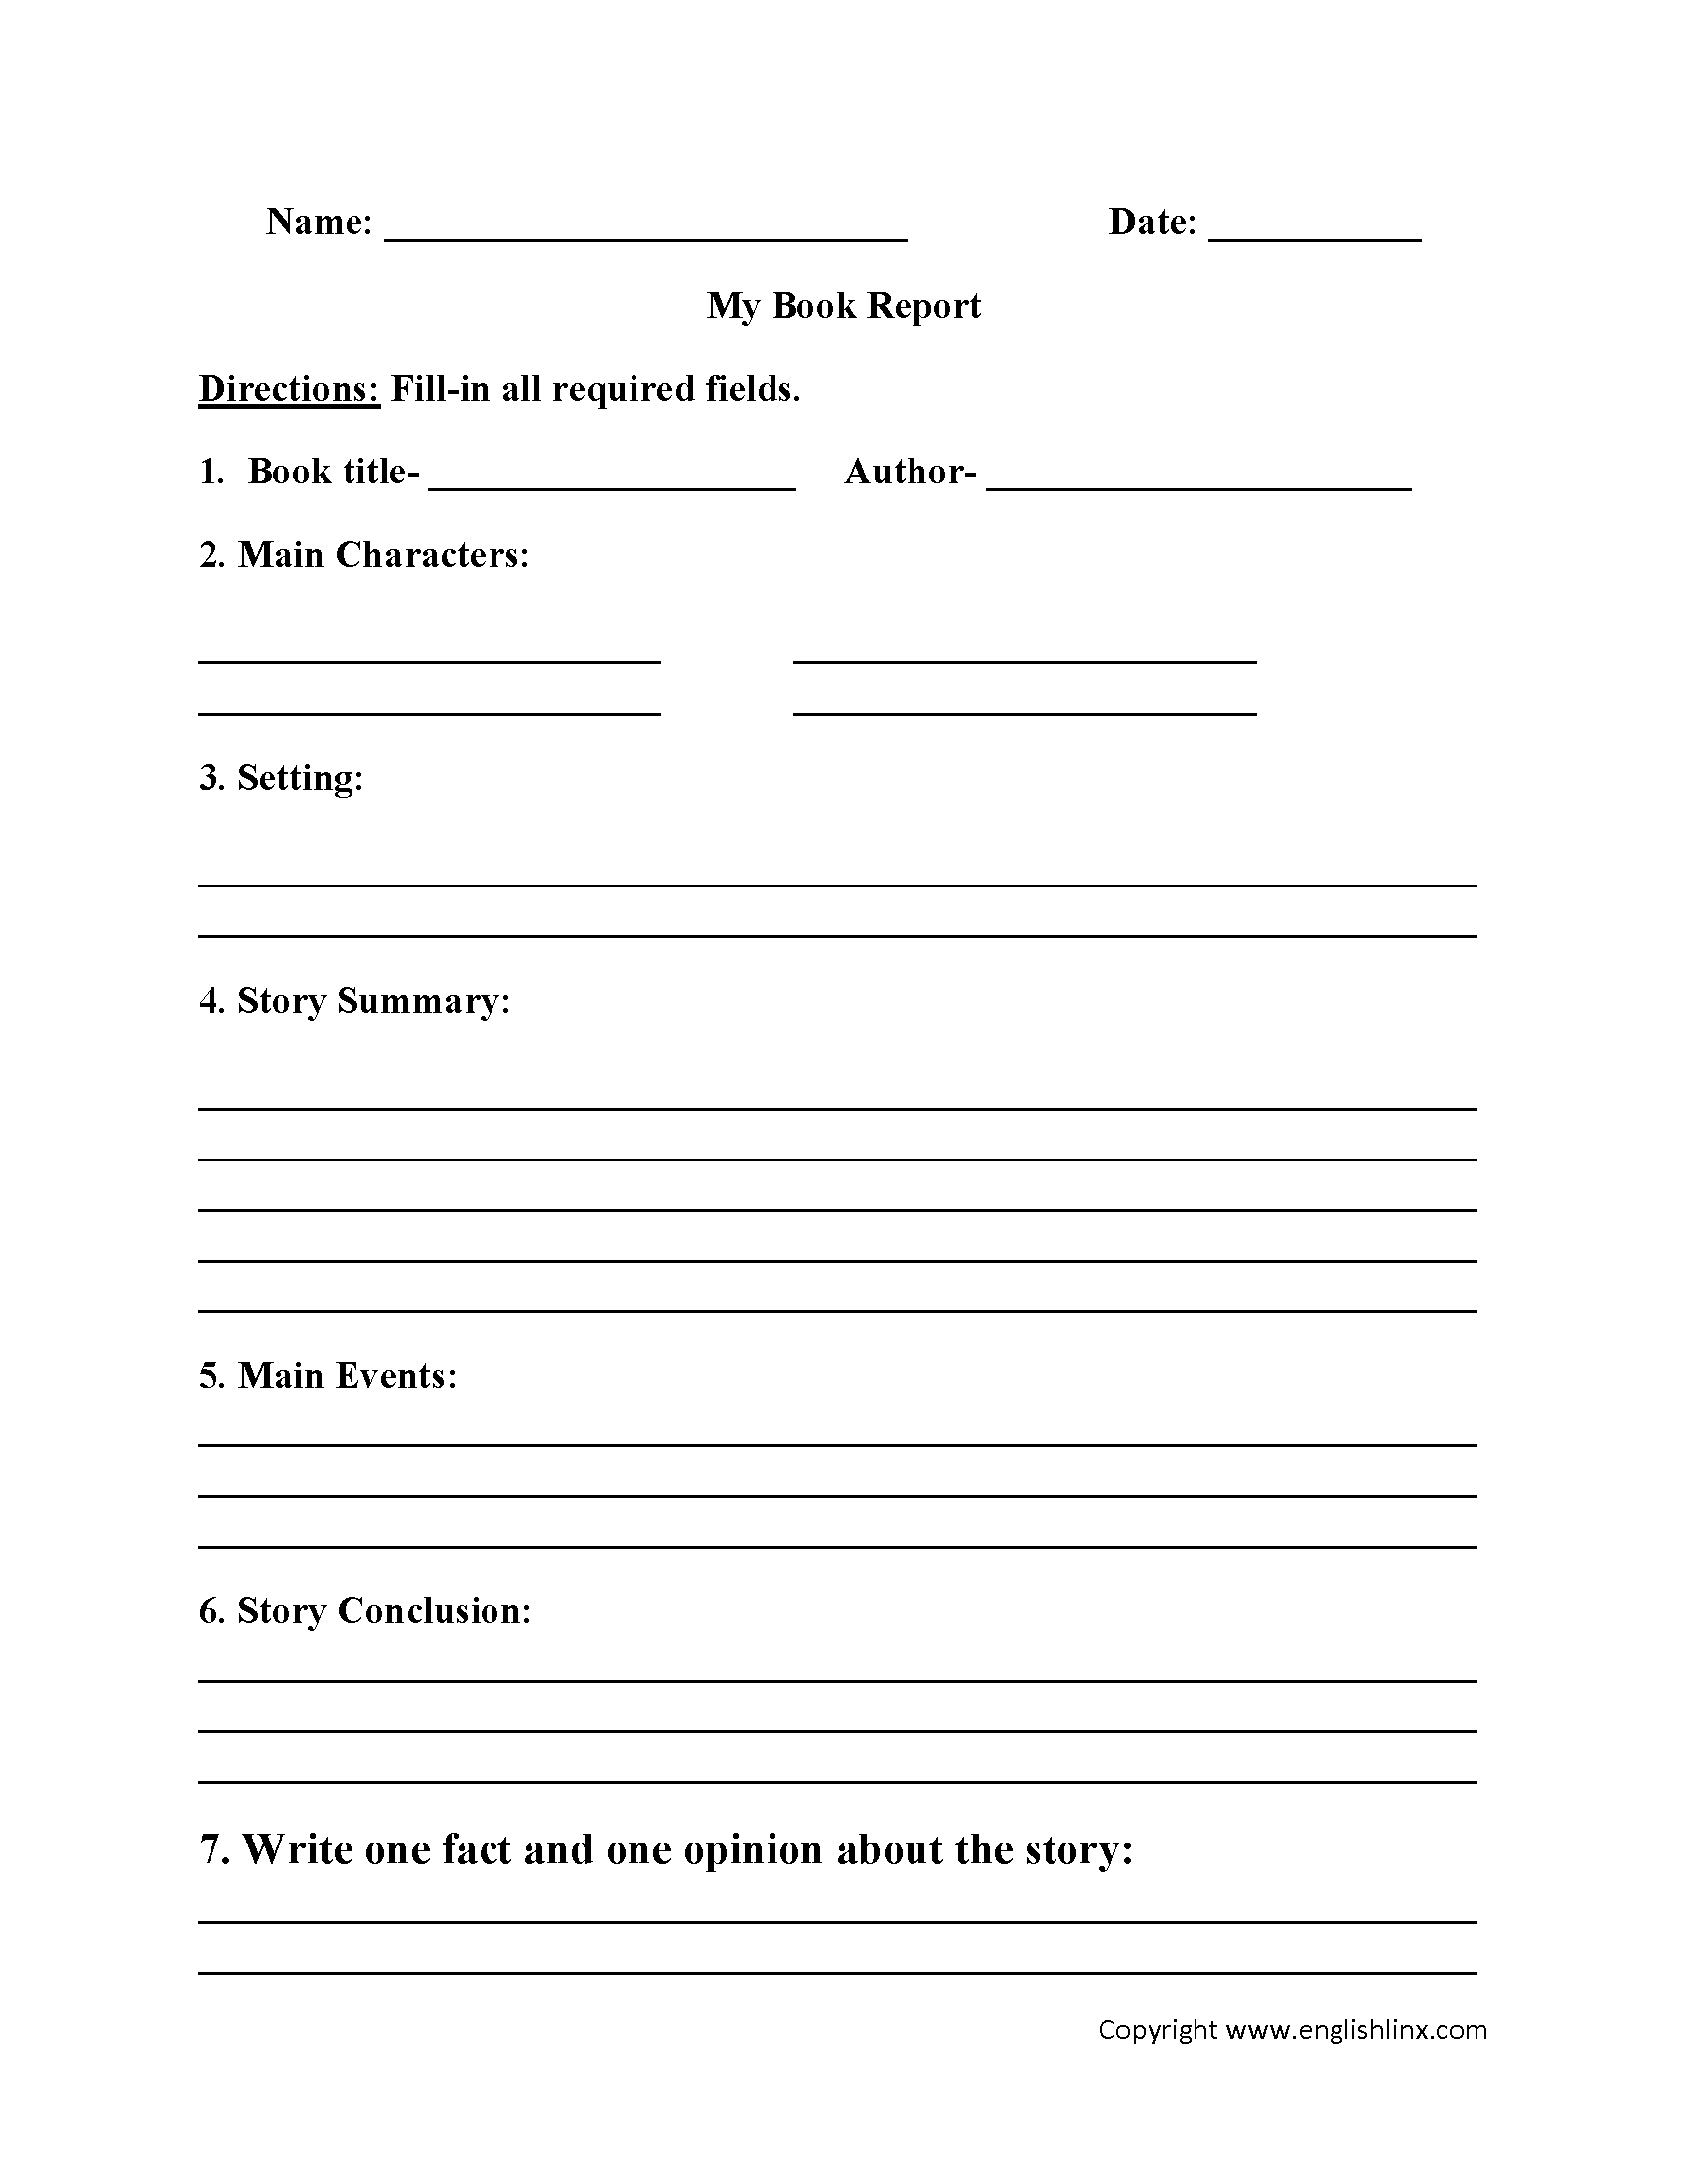 Englishlinx | Book Report Worksheets Throughout High School Book Report Template